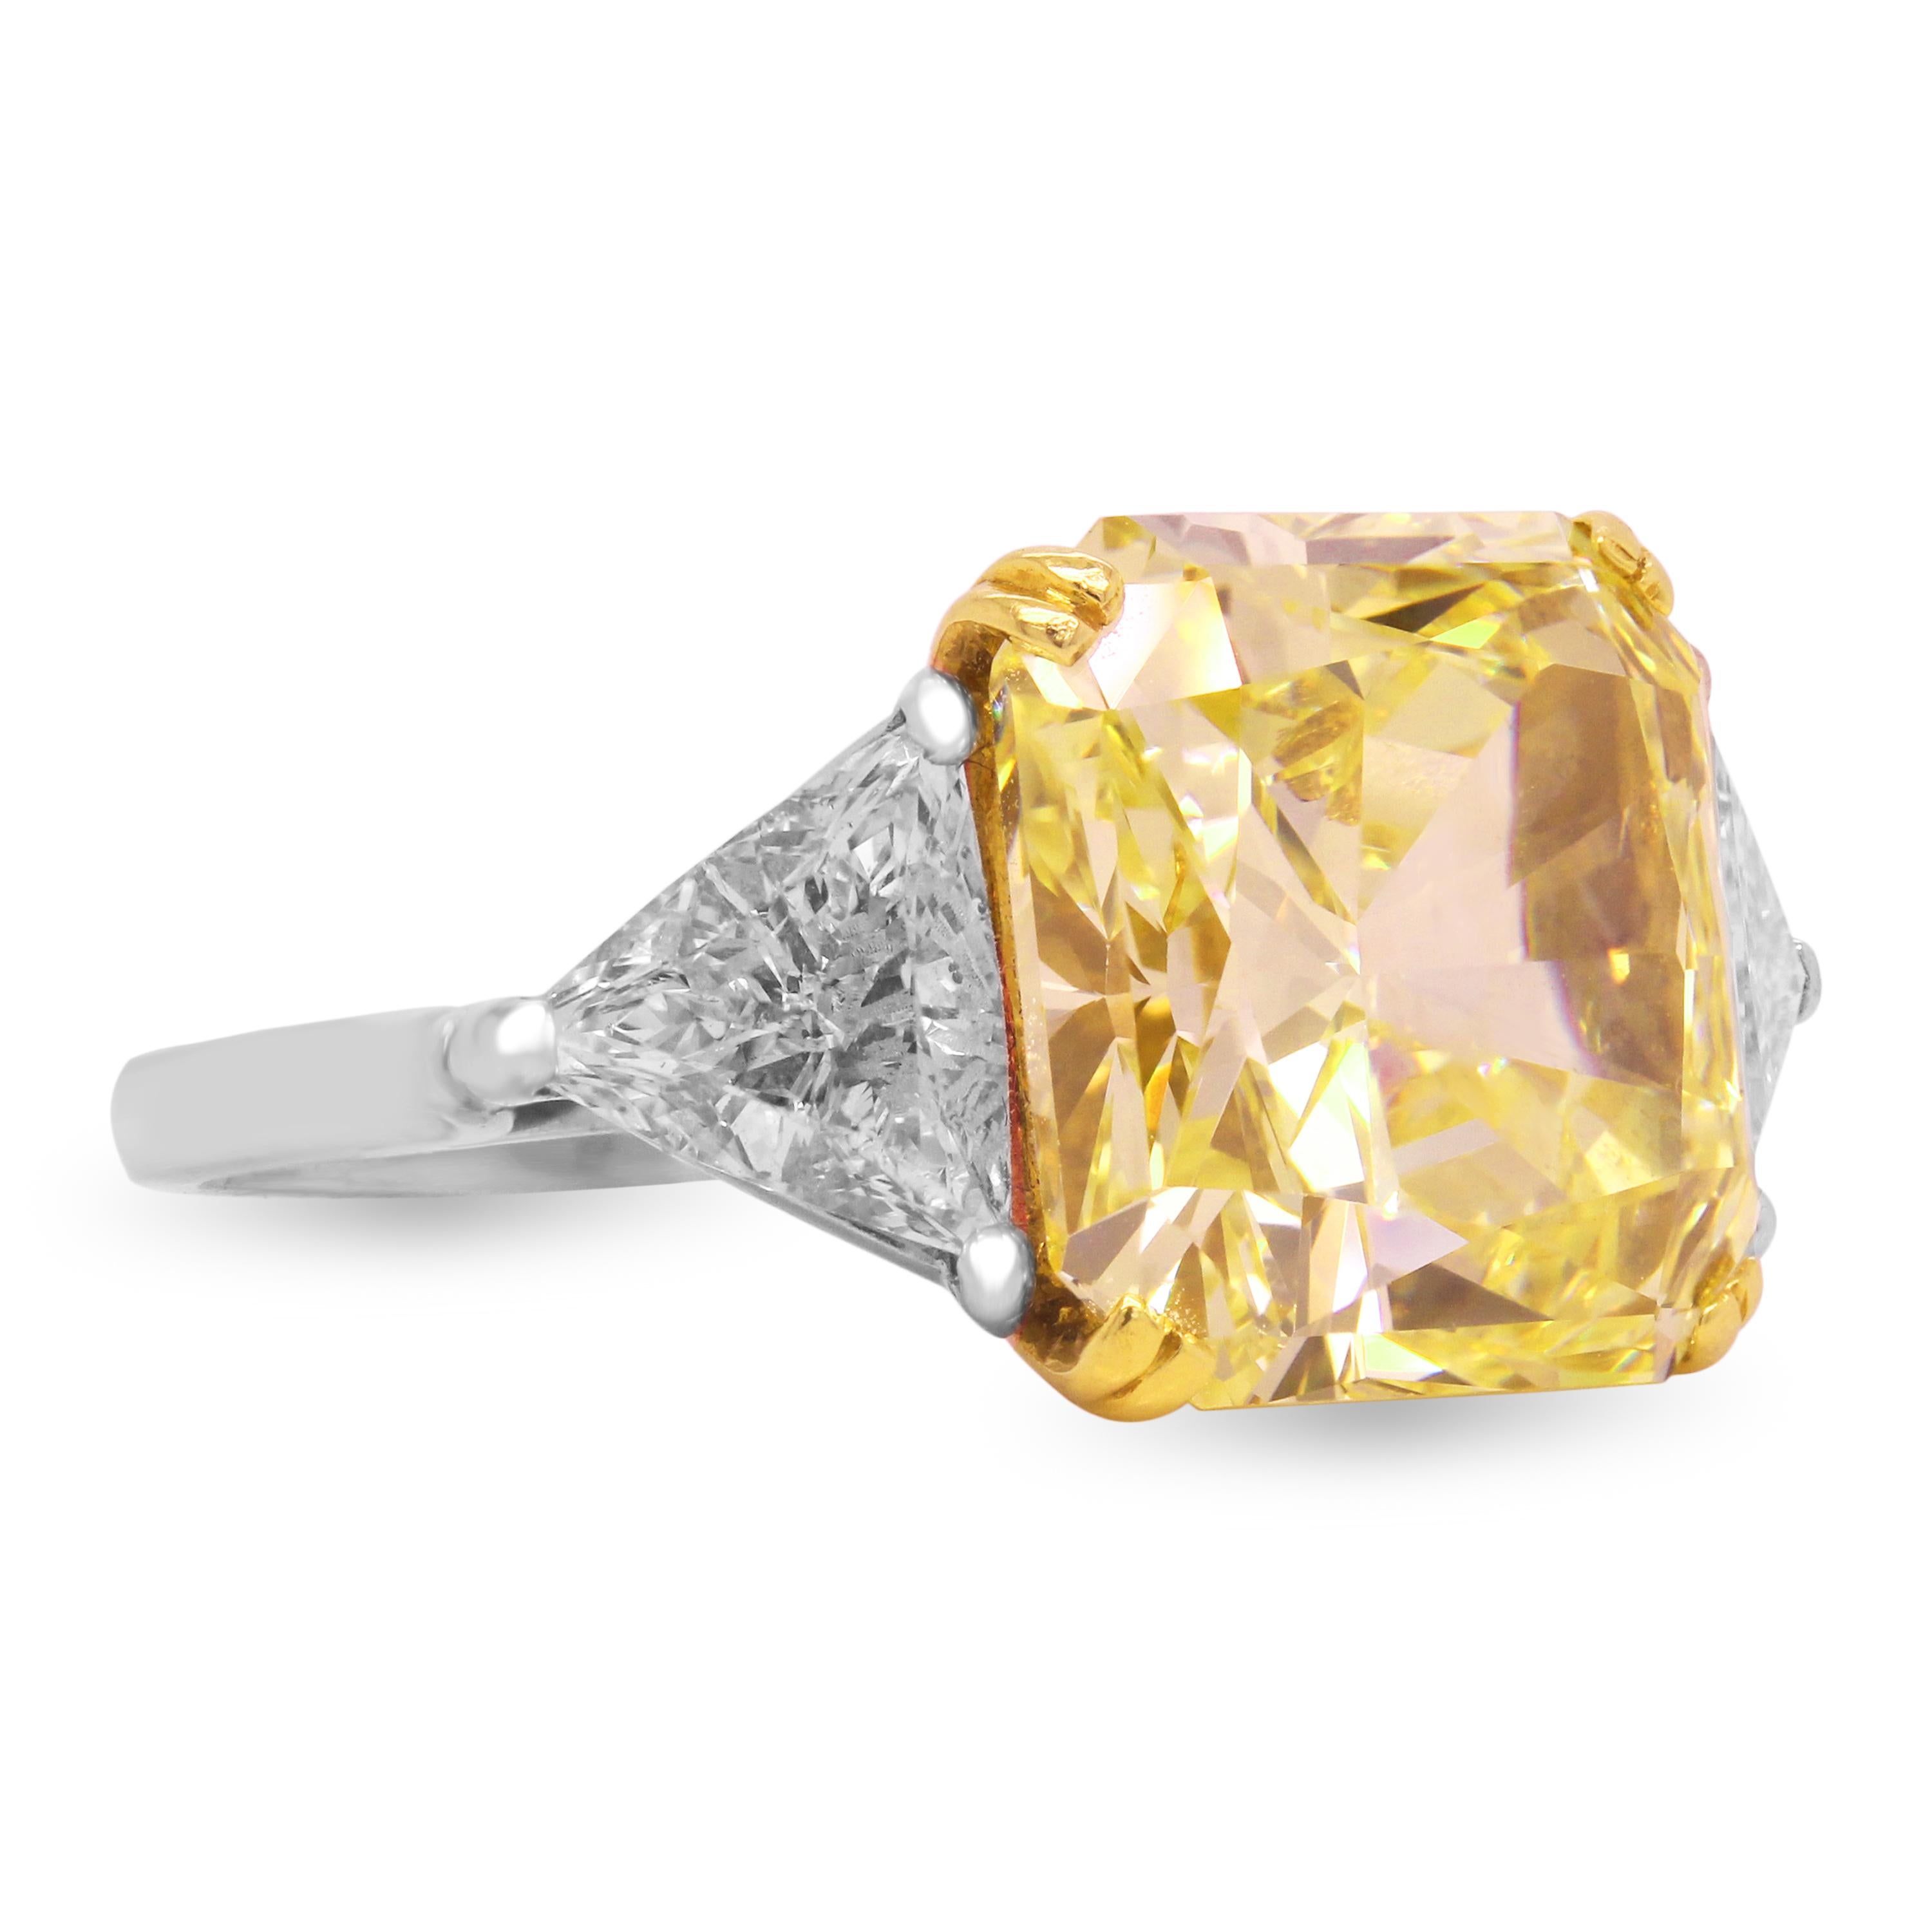 GIA Certified 11.22 Carat VVS1 Fancy Intense Yellow Diamond with Two Trillion Cut Diamonds set in Platinum

This exceptional Yellow diamond is beyond remarkable.

GIA Certified. Report Number: 11598214
11.22 carat. VVS1 Clarity. Natural Fancy